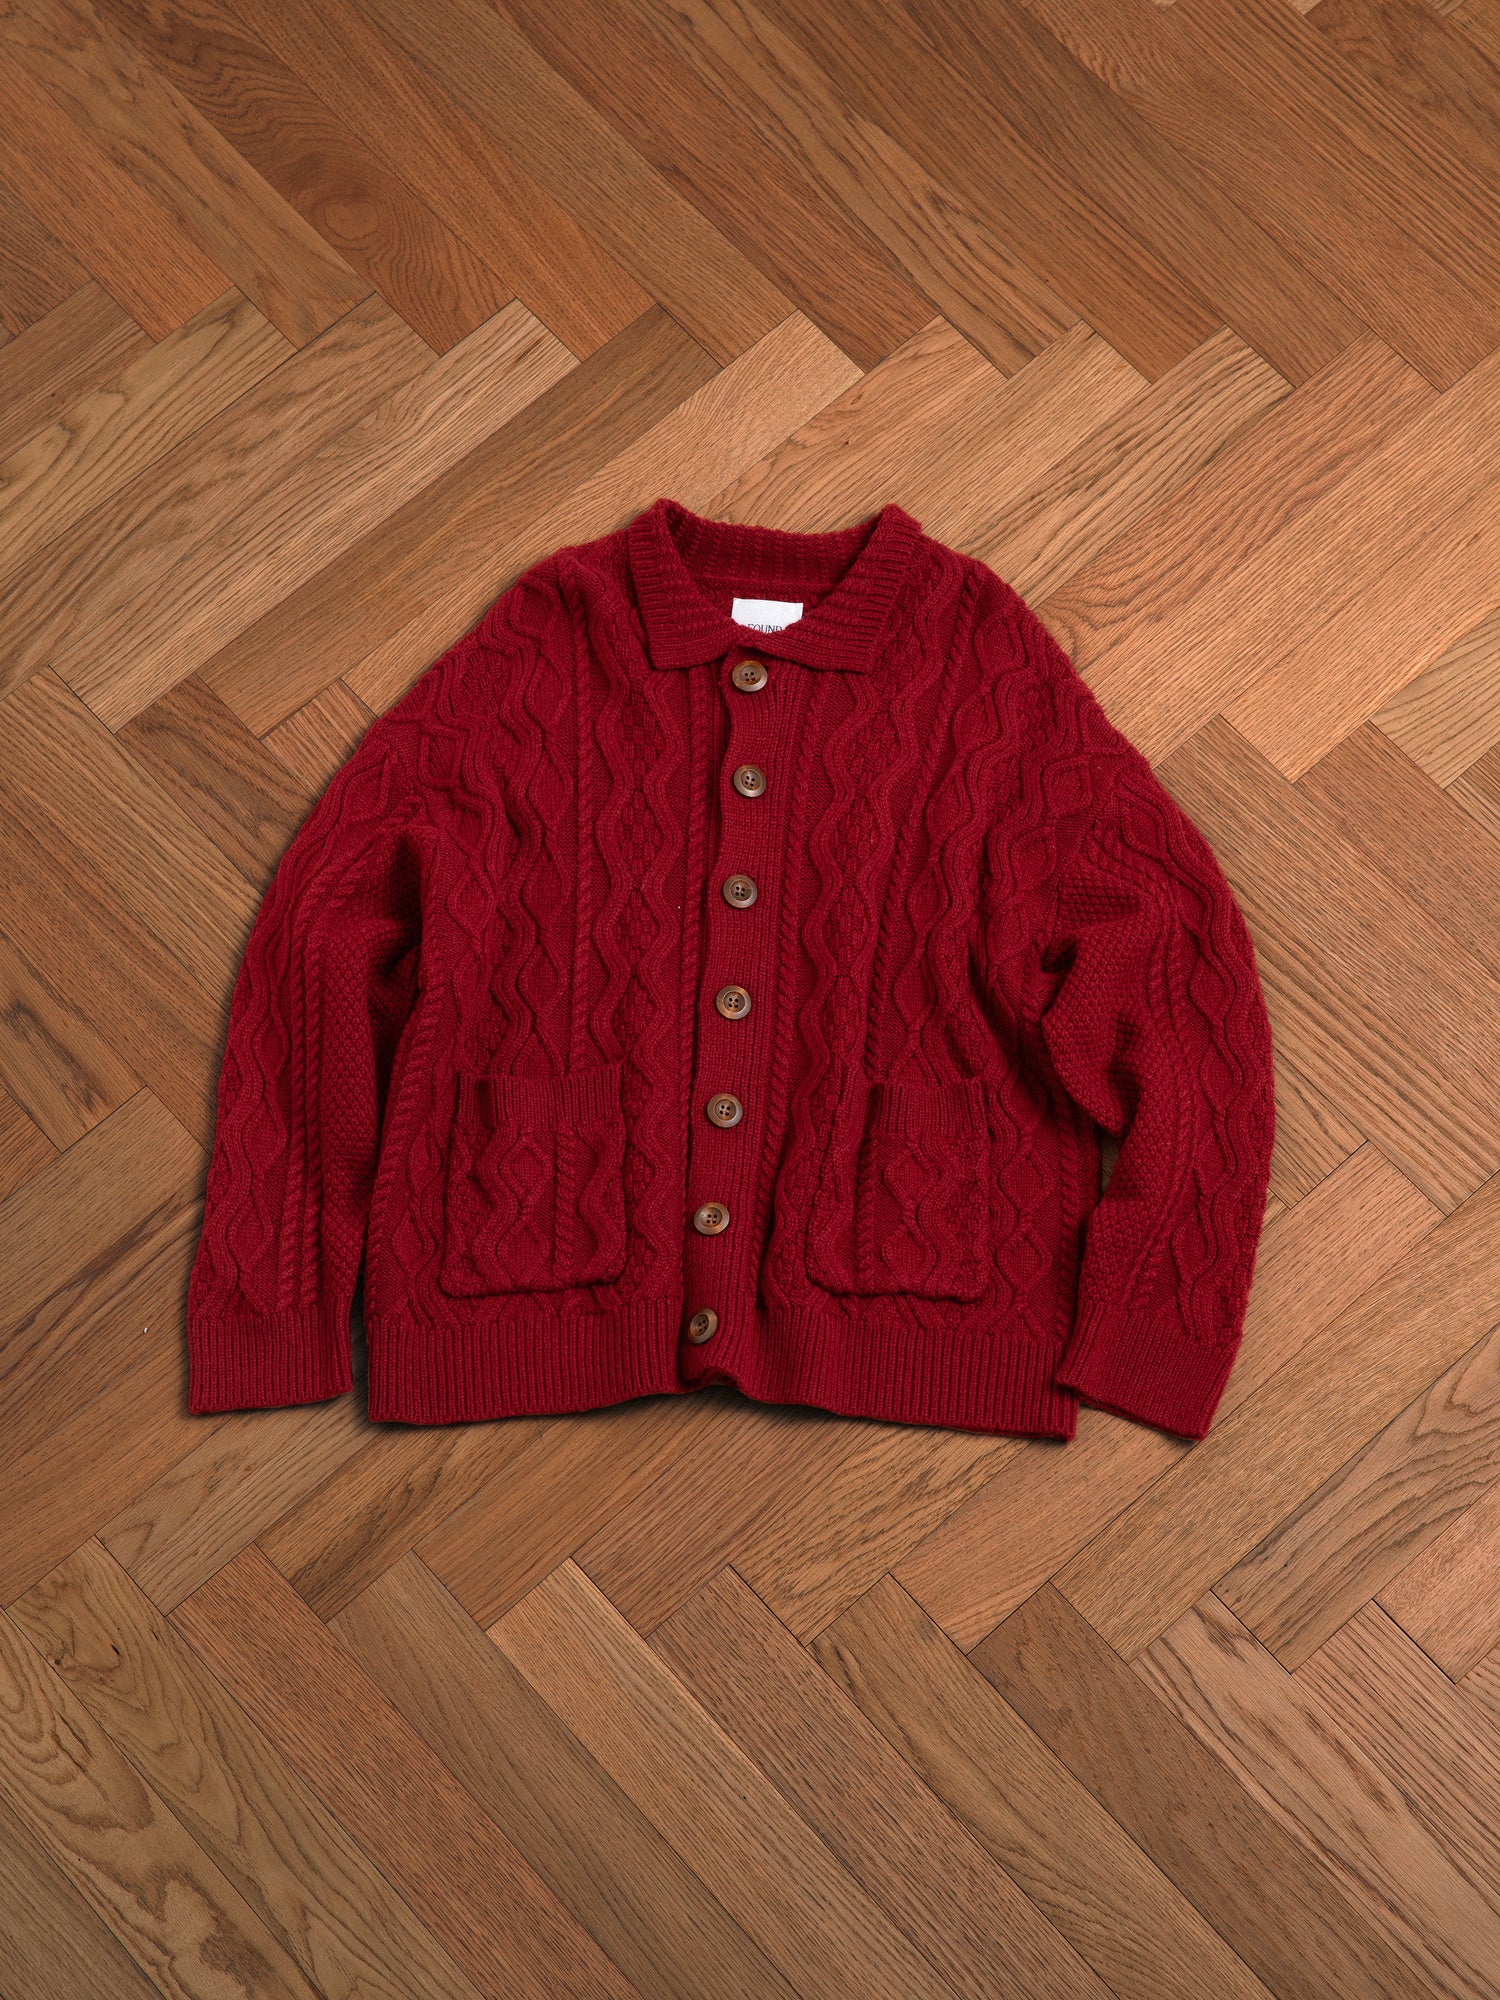 A red-hued yarn, Found Parsidan Cable Knit Cardigan sitting on a wooden floor.